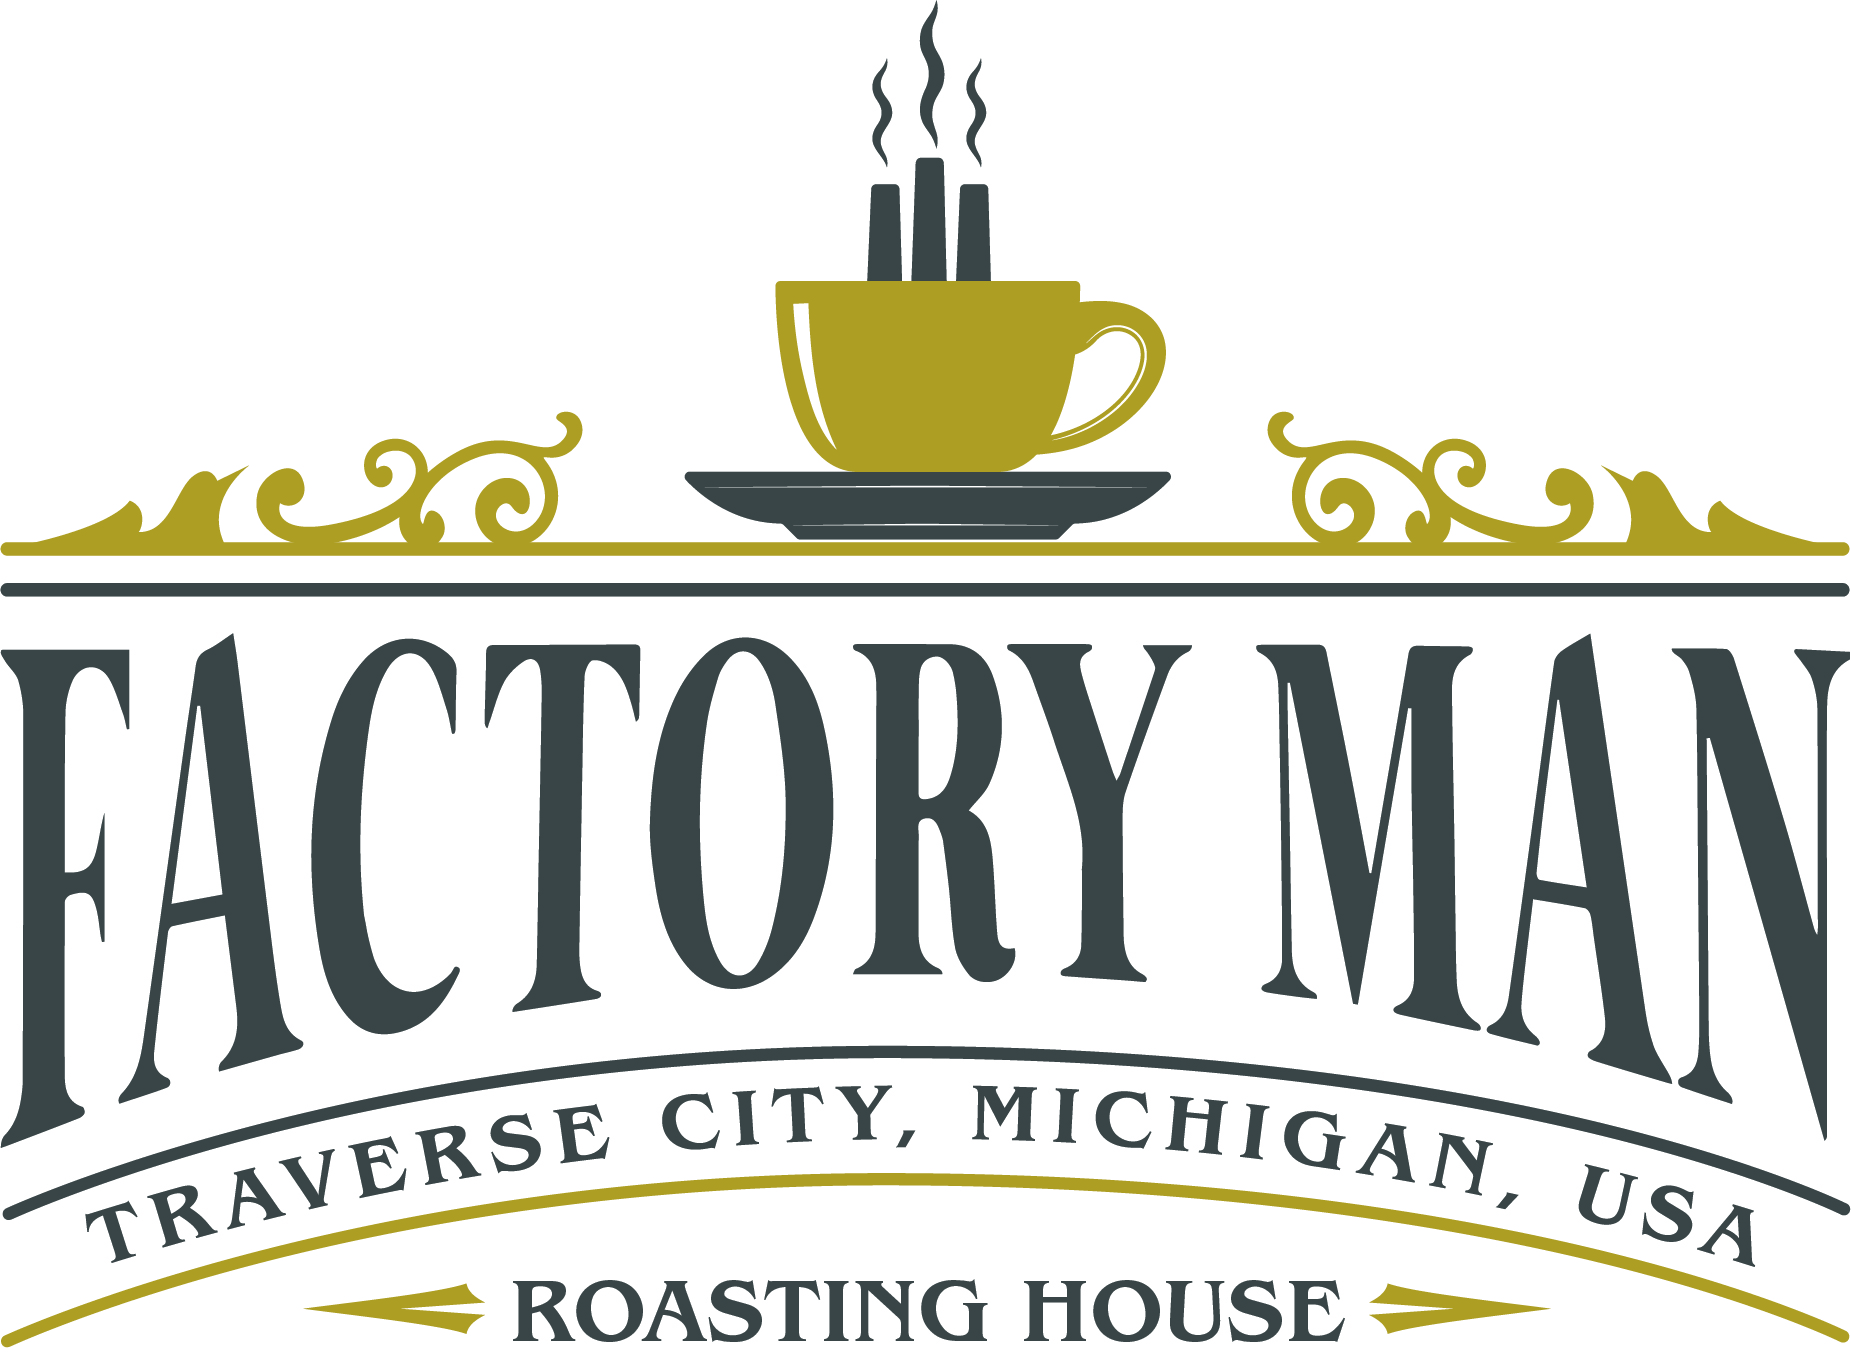 Logo for Factory Man coffee company. The name of the company is in old fashioned typeface surrounded by scrollwork and a cup of coffee on top